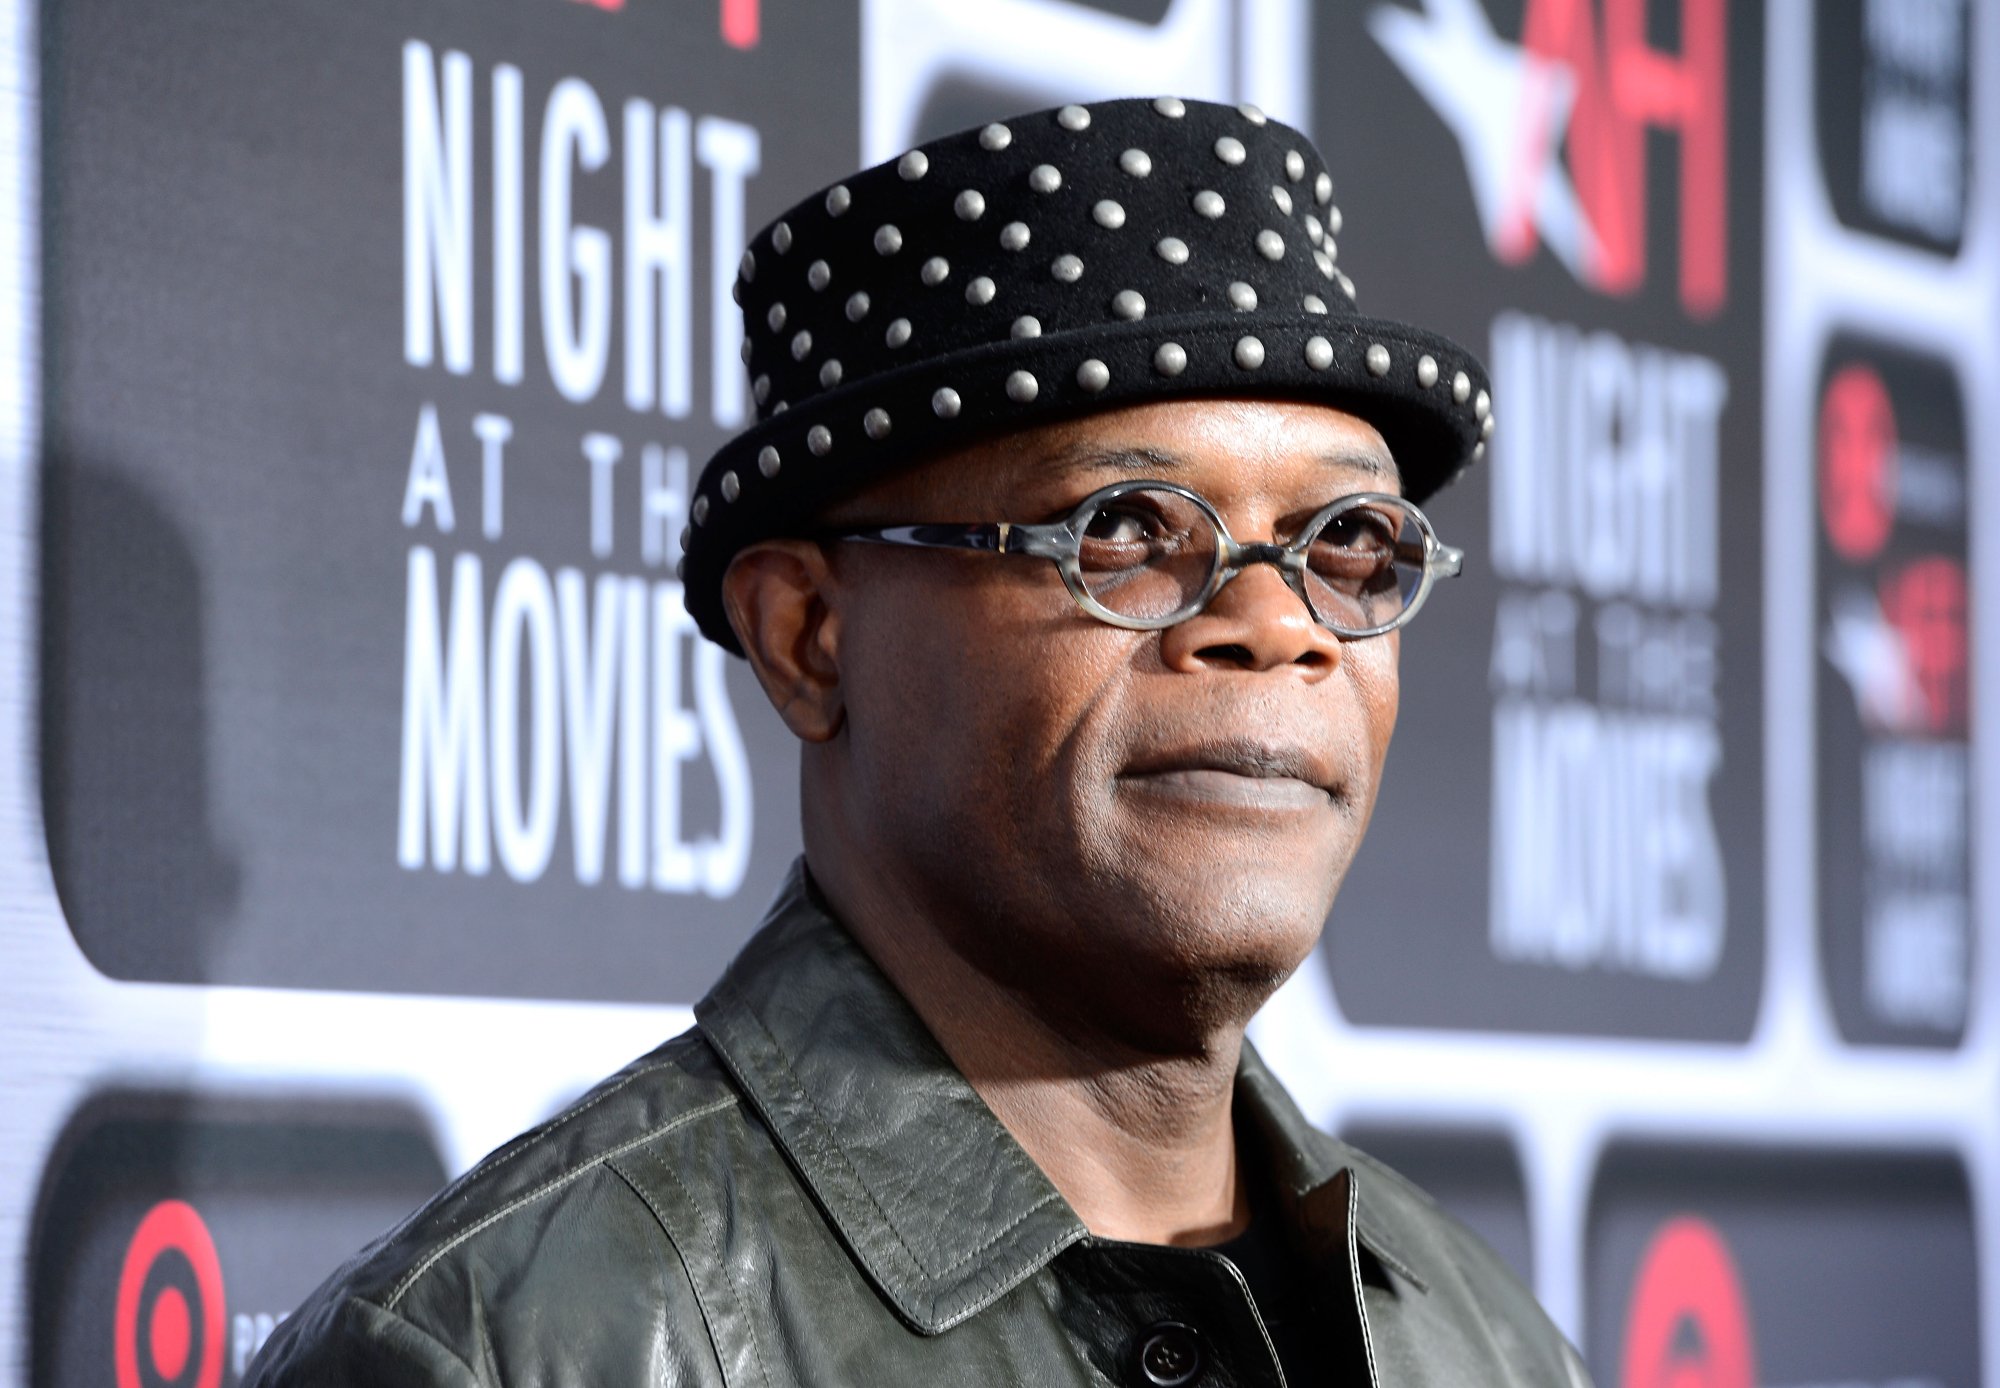 Samuel L. Jackson wearing a dotted hat and a leather jacket in front of a step and repeat